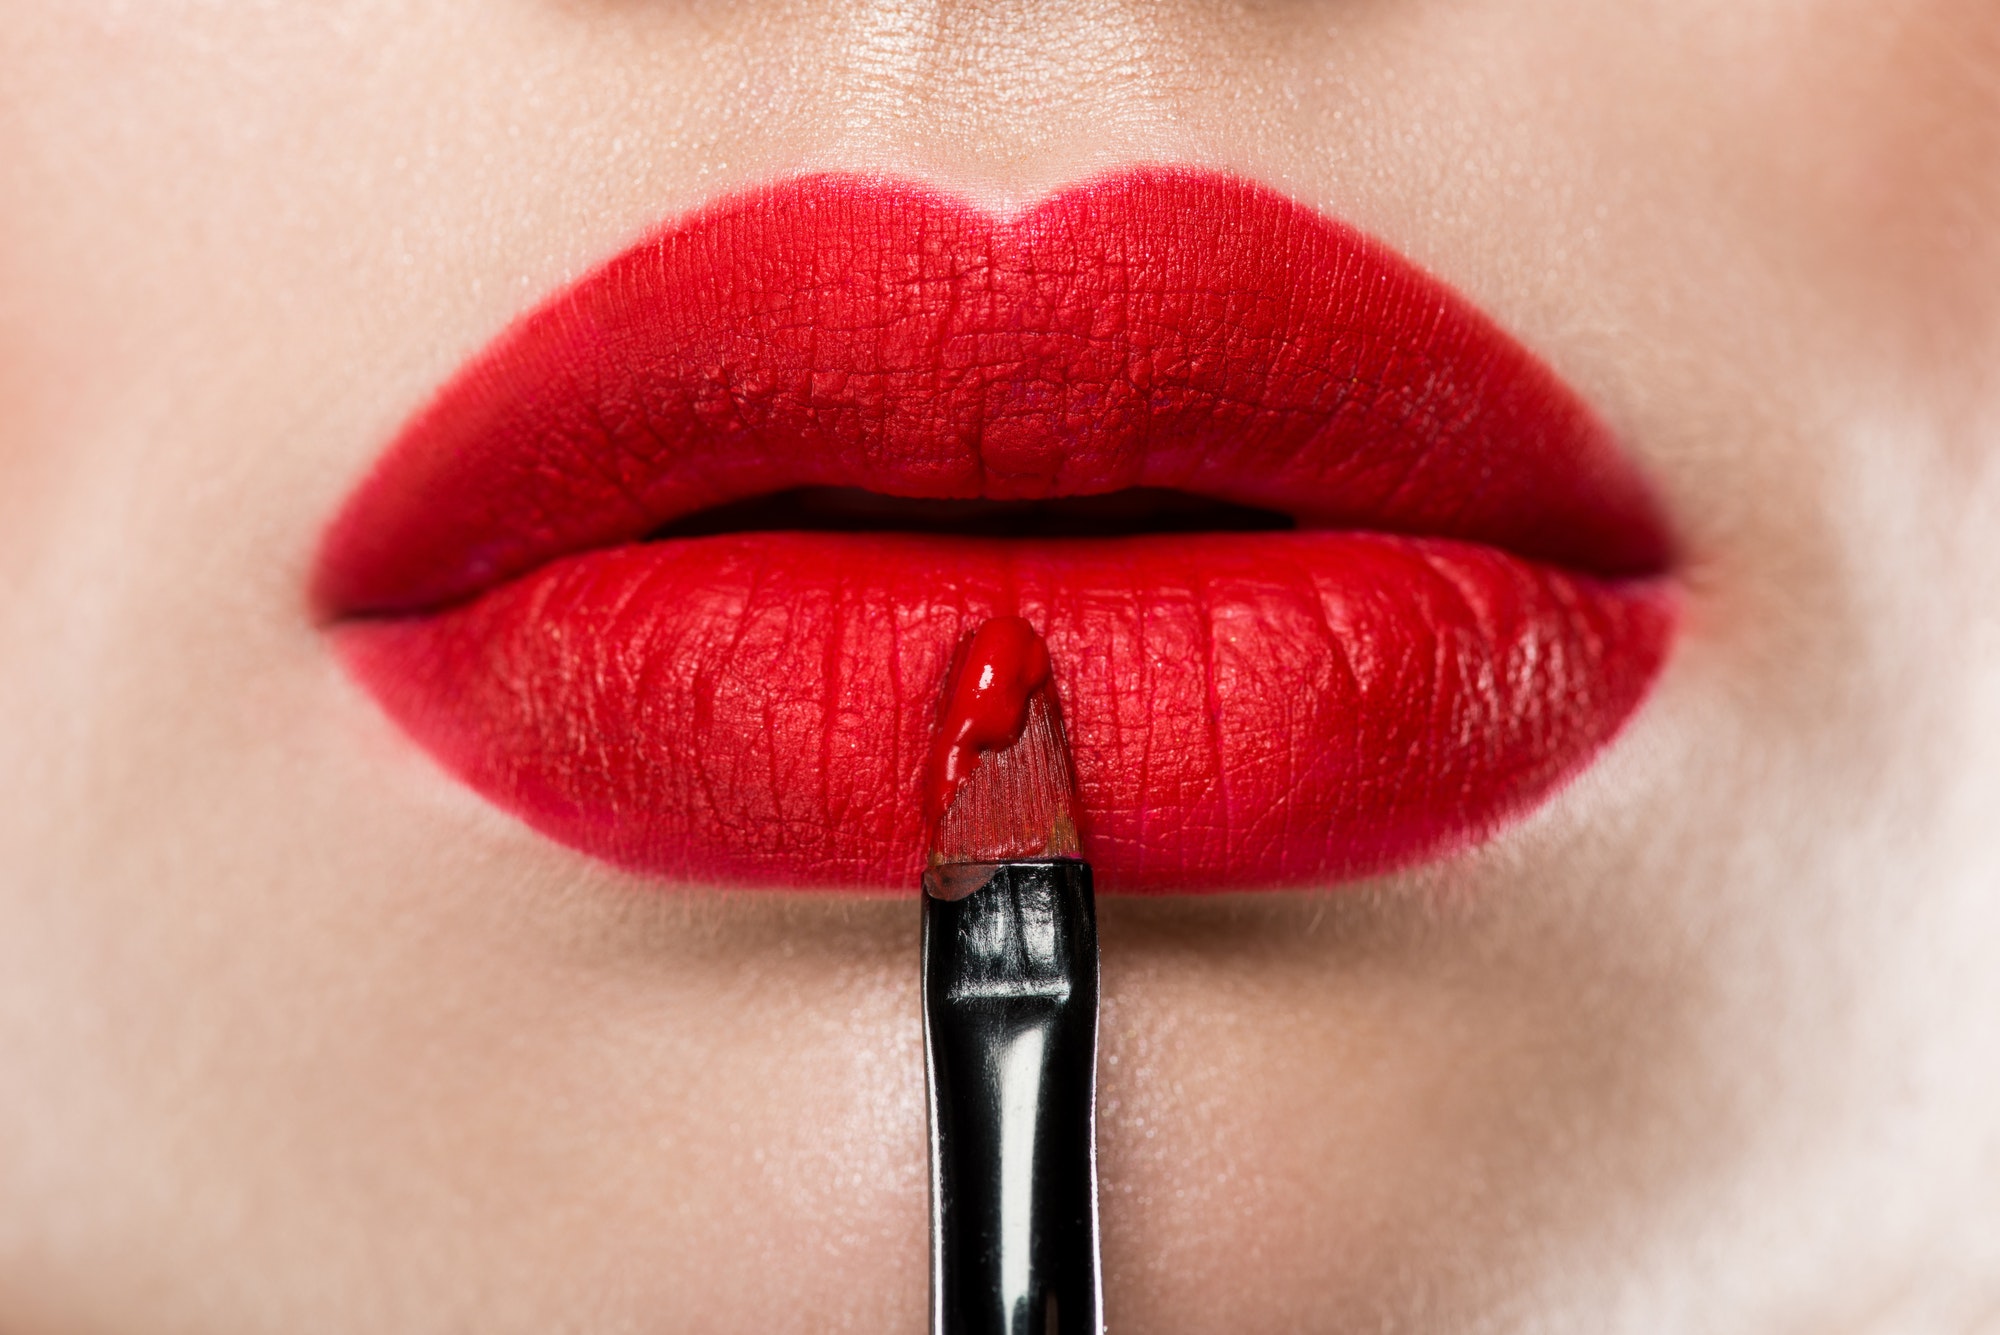 close up view of elegant woman applying red lipstick with cosmetic brush